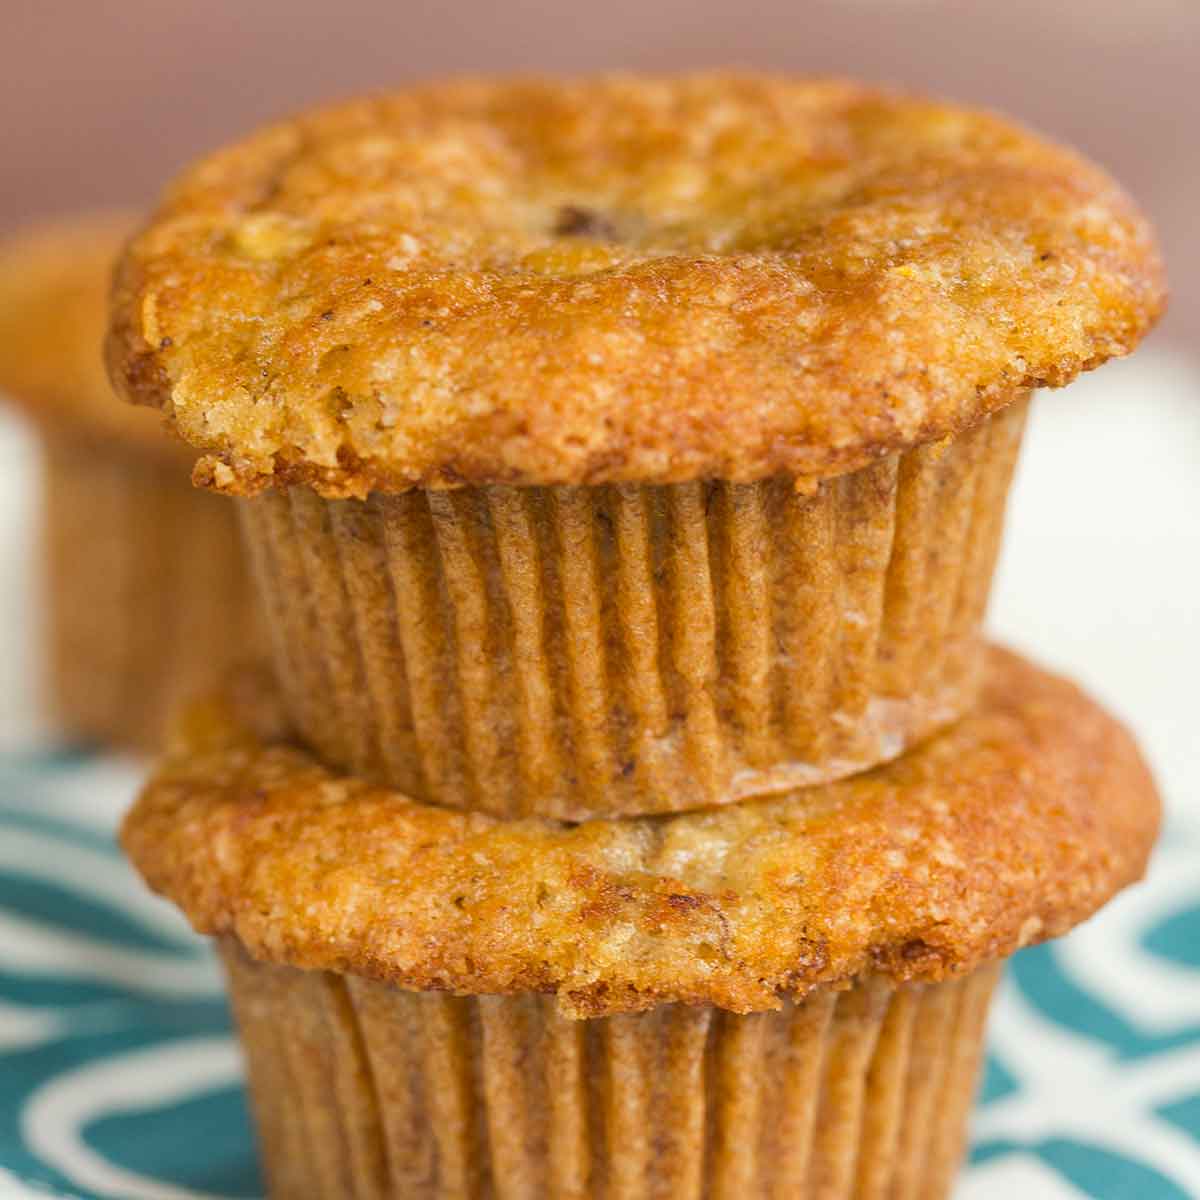 Two banana muffins stacked on top of each other on a teal and white dish towel.